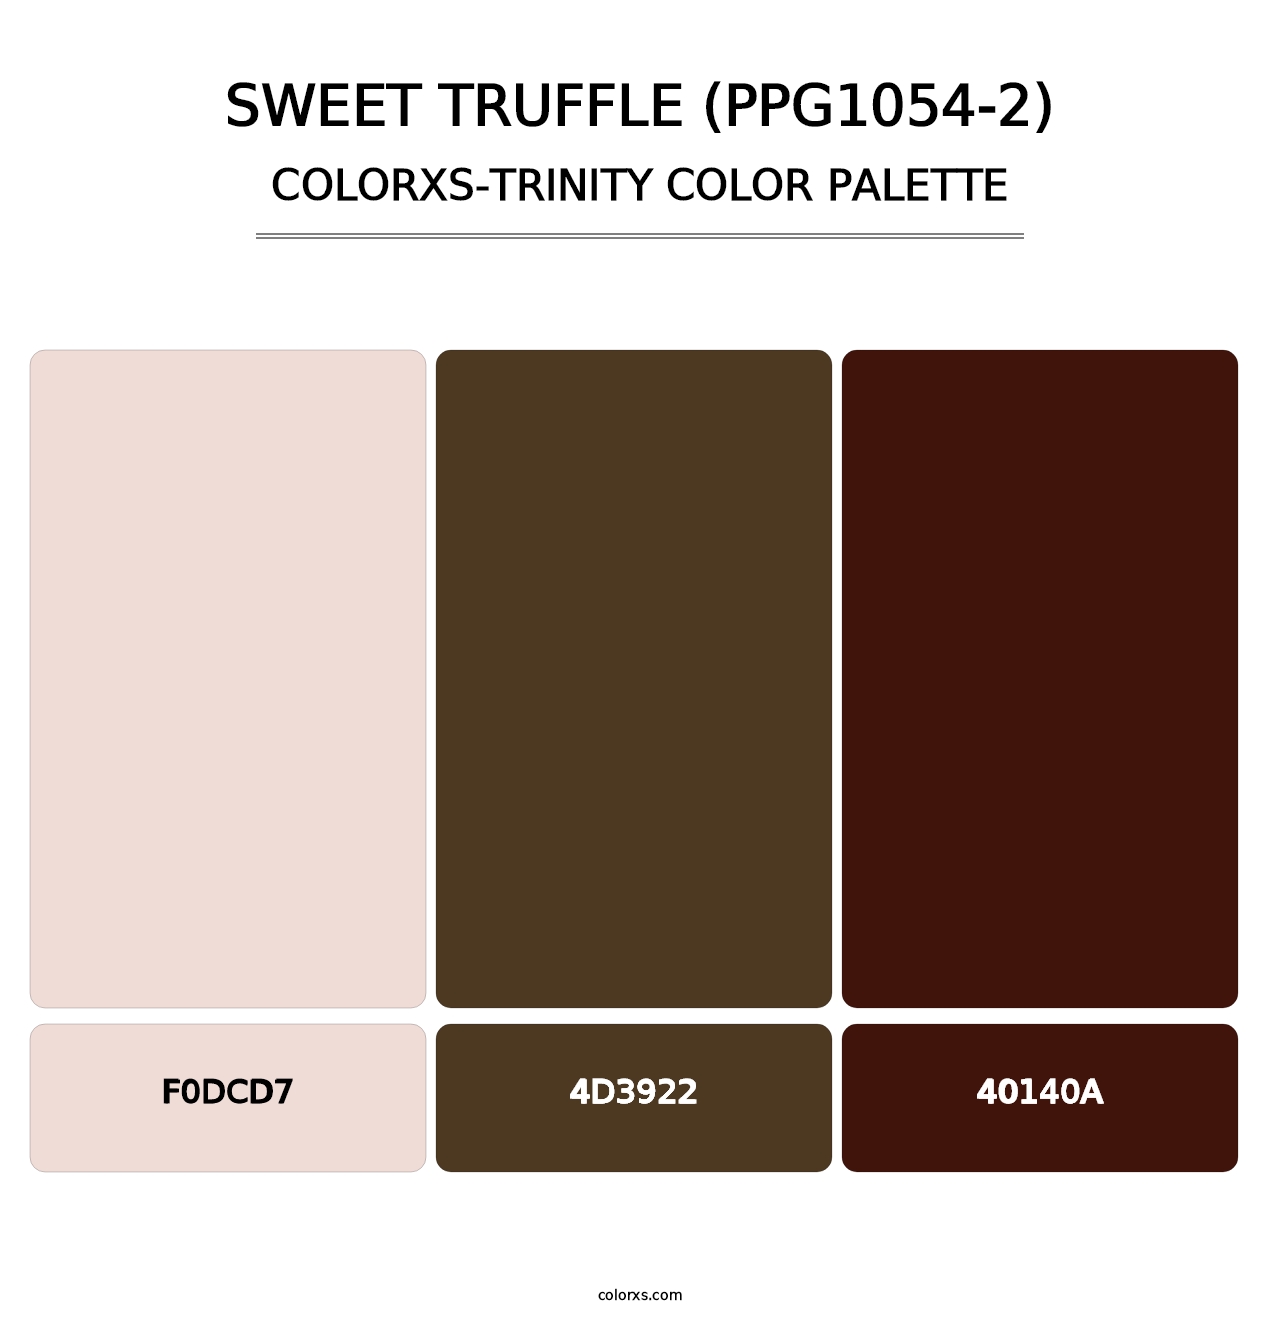 Sweet Truffle (PPG1054-2) - Colorxs Trinity Palette